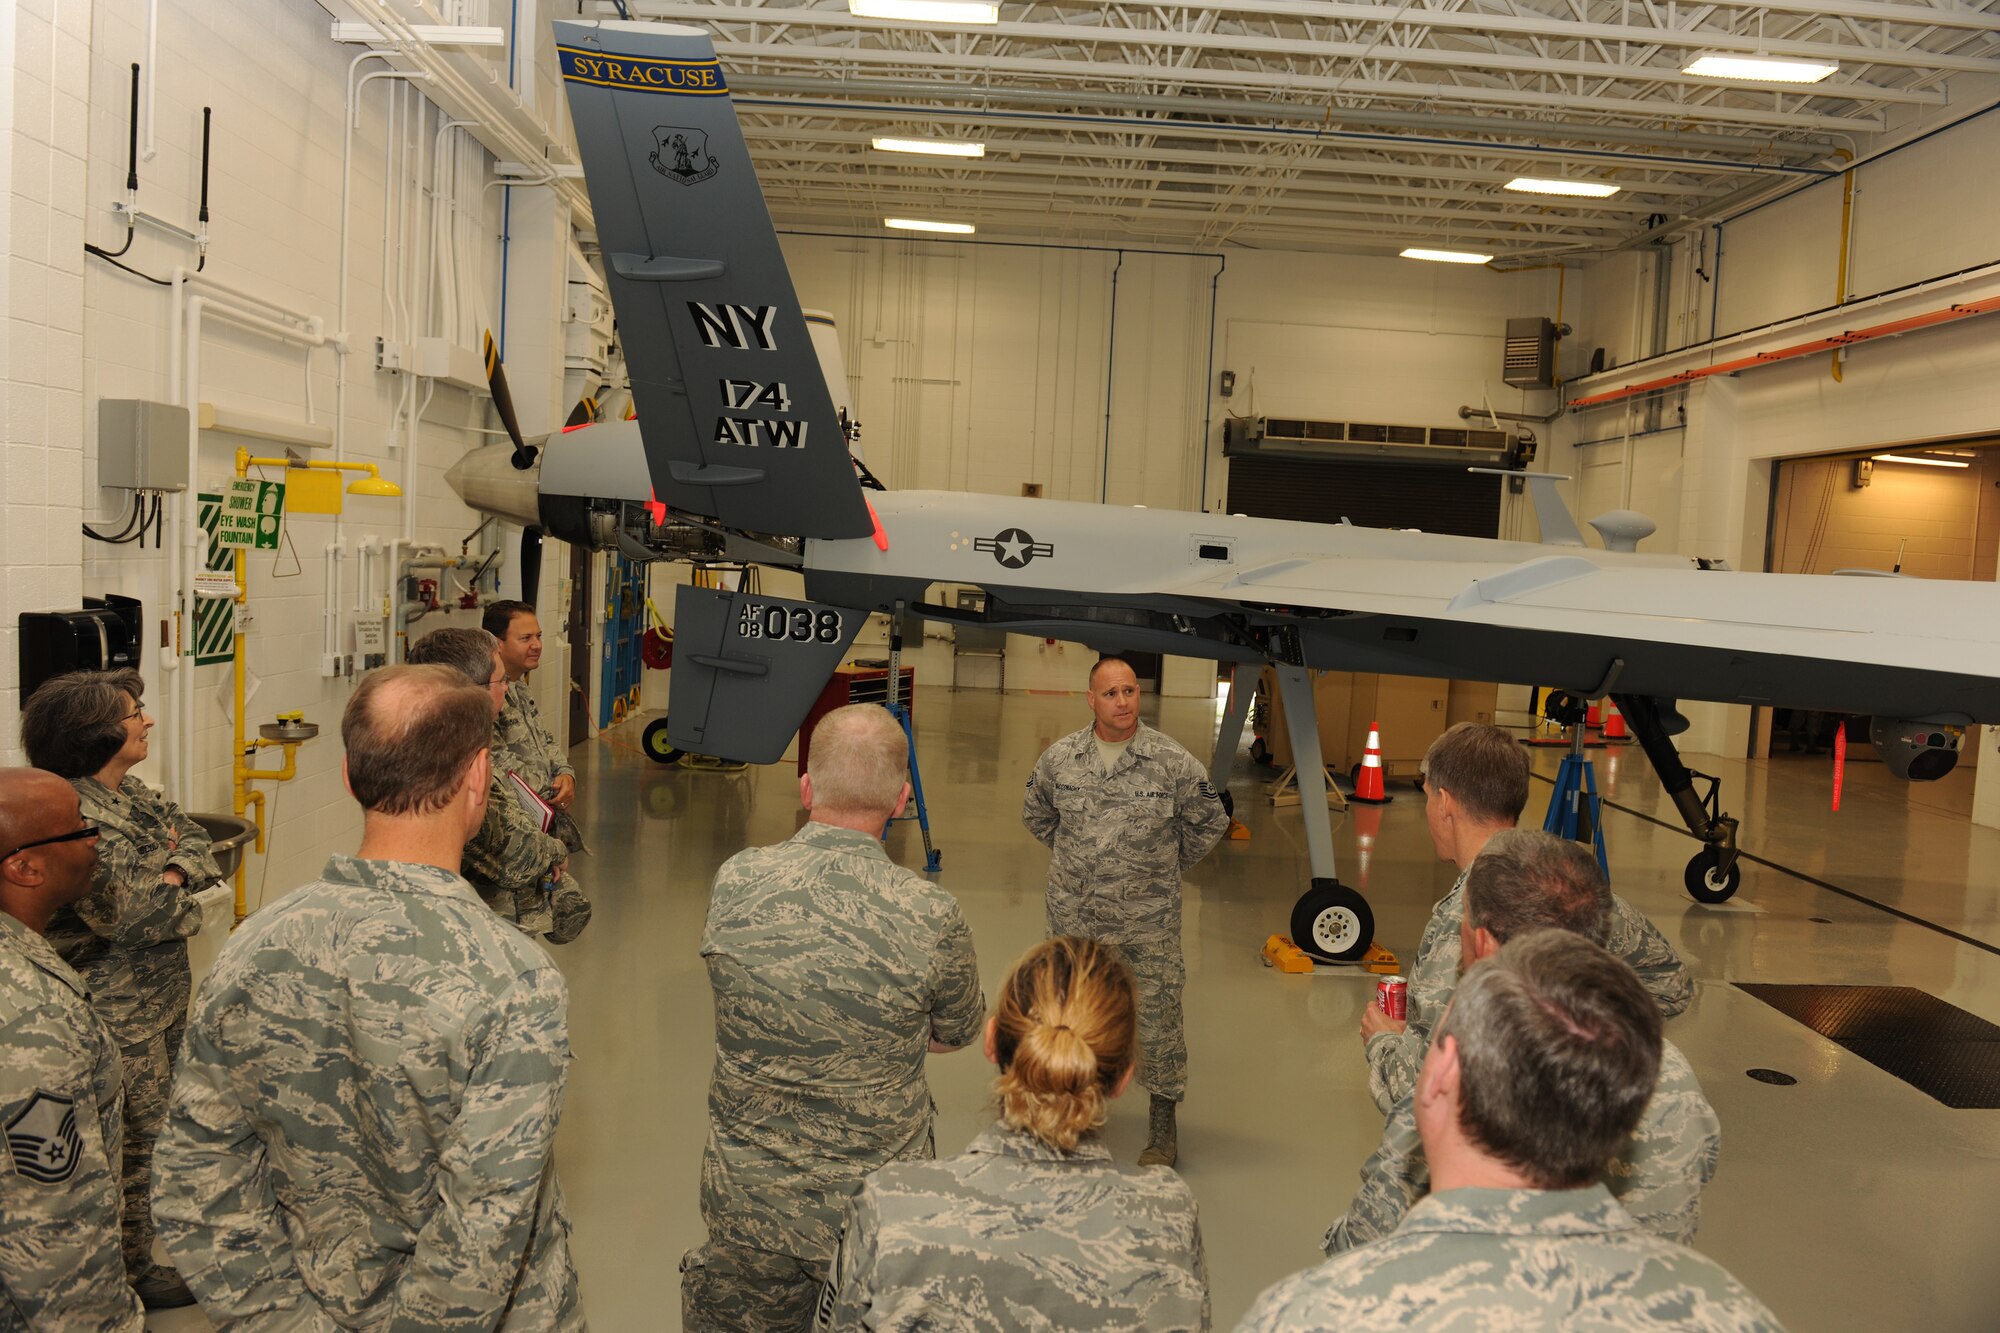 Members of the Air National Guard (ANG) Council of the Judge Advocate General of the Air Force (TJAG) touring the 174th Fighter Wing’s Field Training Detachment, the site where all MQ-9 Reaper maintenance personnel (active duty Air Force, Air National Guard and Air Force Reserve) obtain specialized training to perform various maintenance functions.